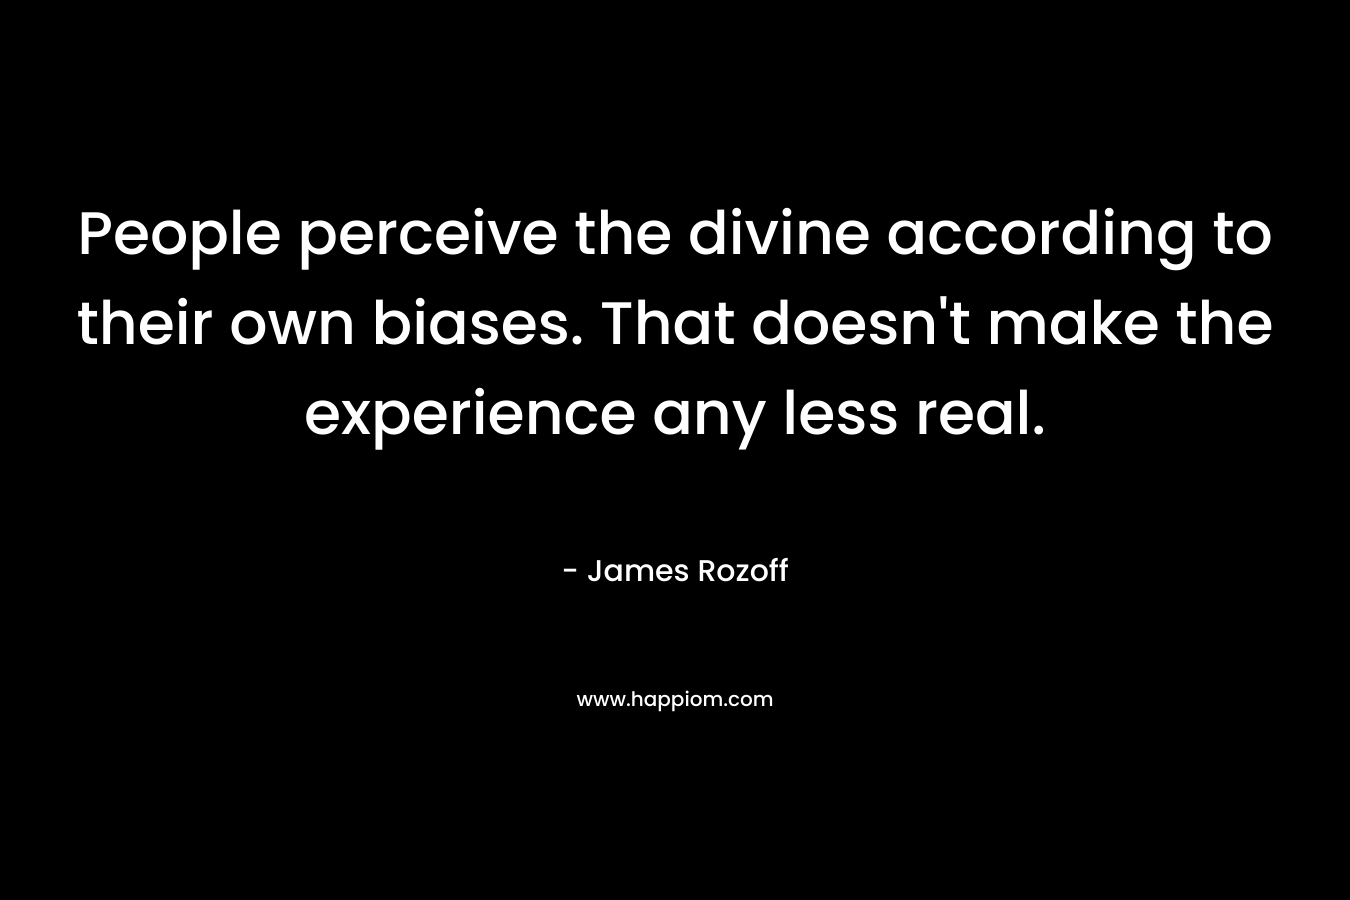 People perceive the divine according to their own biases. That doesn't make the experience any less real.